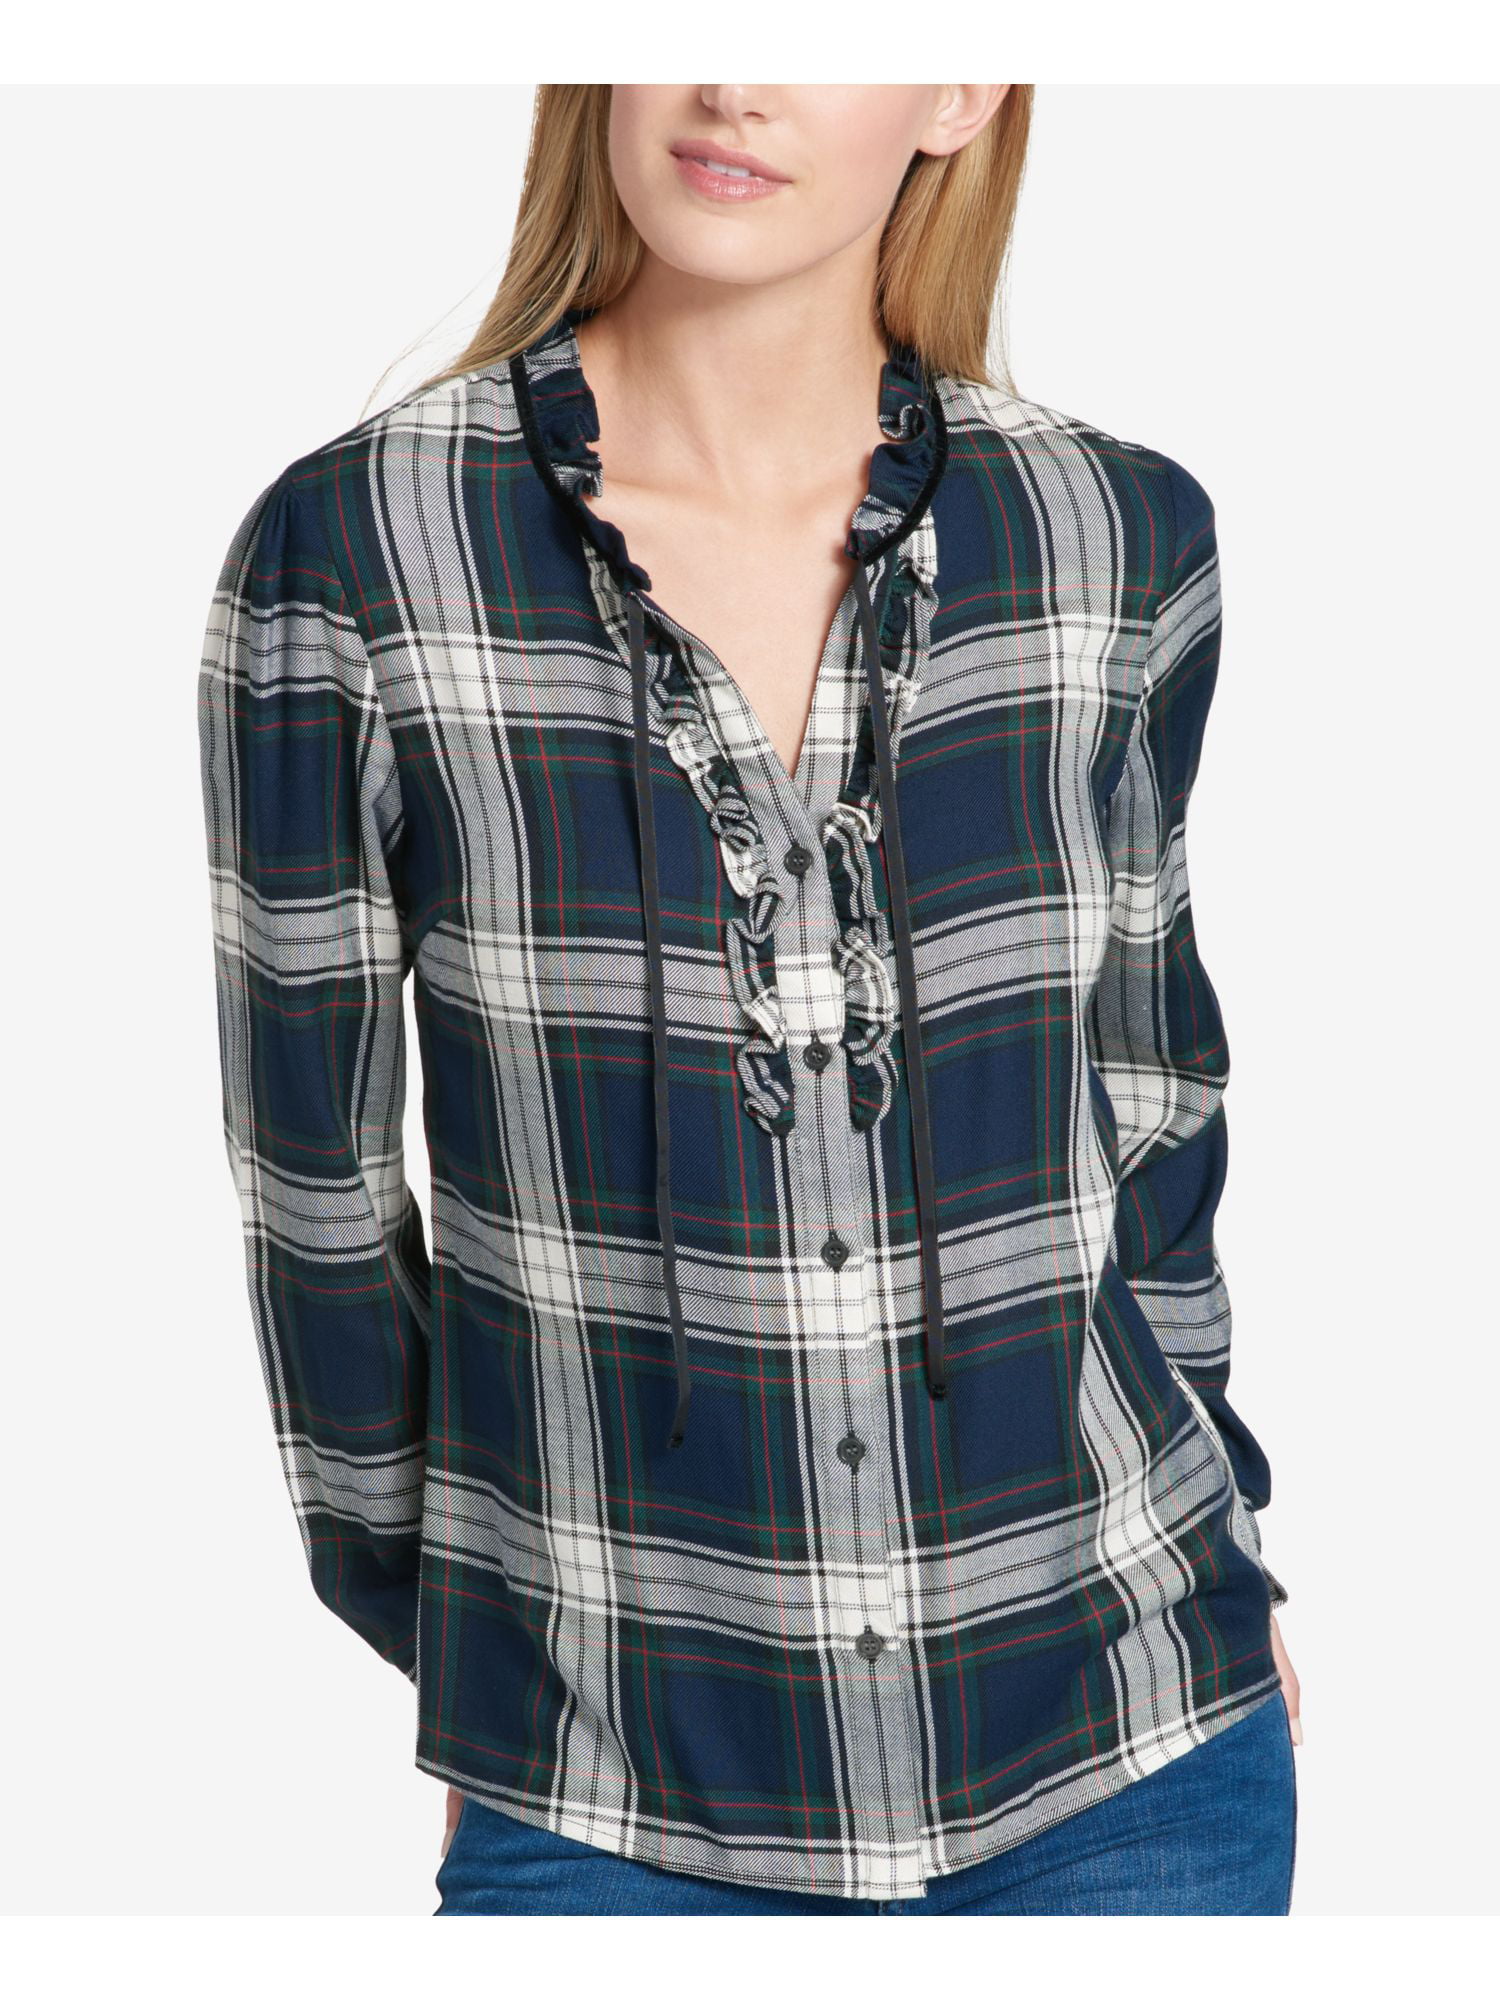 Tommy Hilfiger Long Sleeve Button Up Shirt Navy Plaid